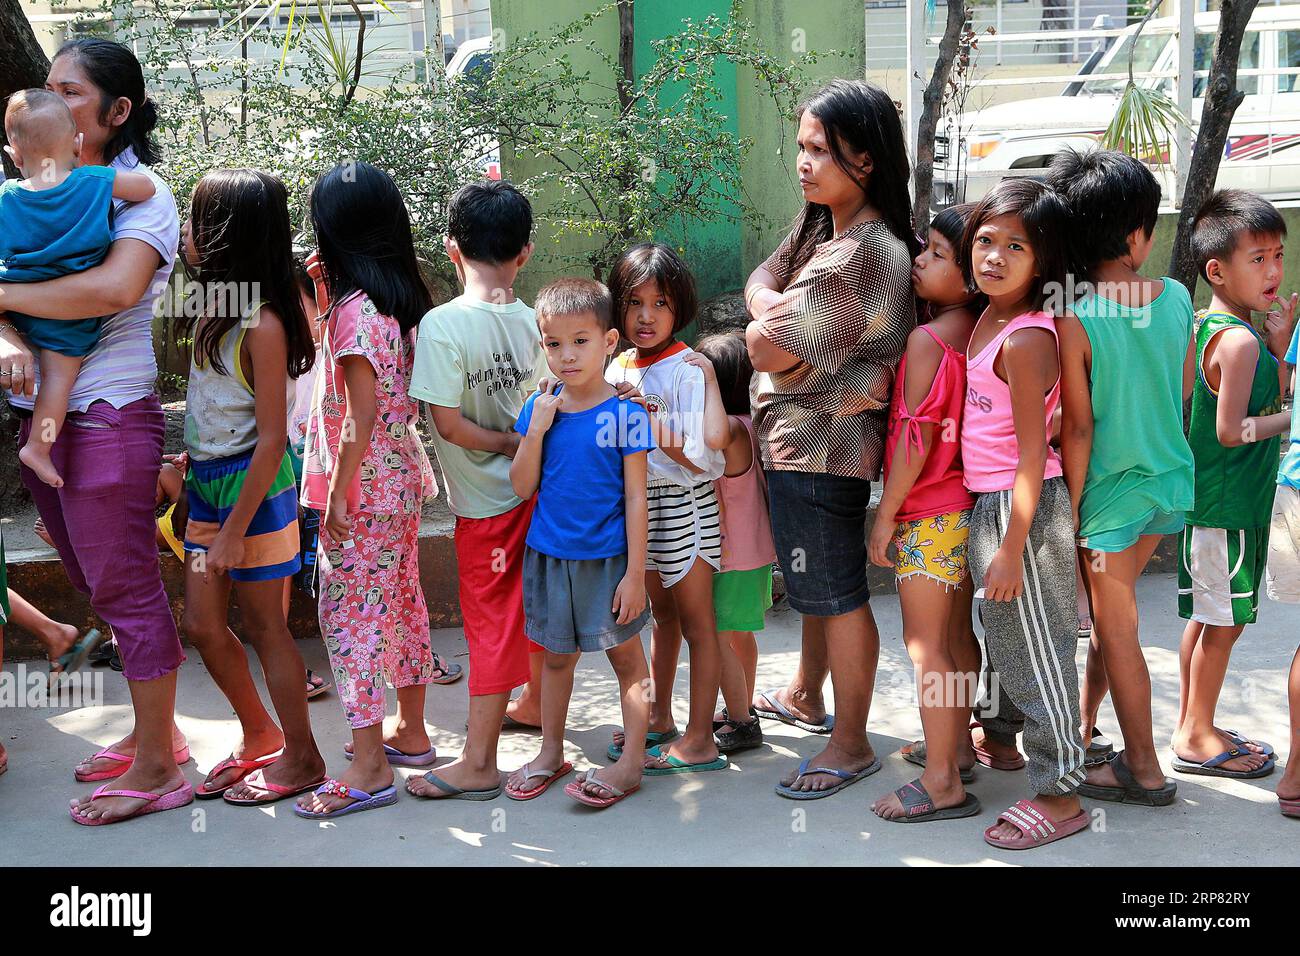 (190216) -- MANILA, Feb. 16, 2019 -- Parents and their children wait for free measles vaccines during the Philippine Red Cross Measles Outbreak Vaccination Response at a slum area in Manila, the Philippines, Feb. 16, 2019. The Philippine Department of Health (DOH) reported this week that over 4,300 measles cases were confirmed from Jan. 1 to Feb. 13, 2019, with the number expected to increase in the coming days. ) PHILIPPINES-MANILA-MEASLES VACCINATION ROUELLExUMALI PUBLICATIONxNOTxINxCHN Stock Photo